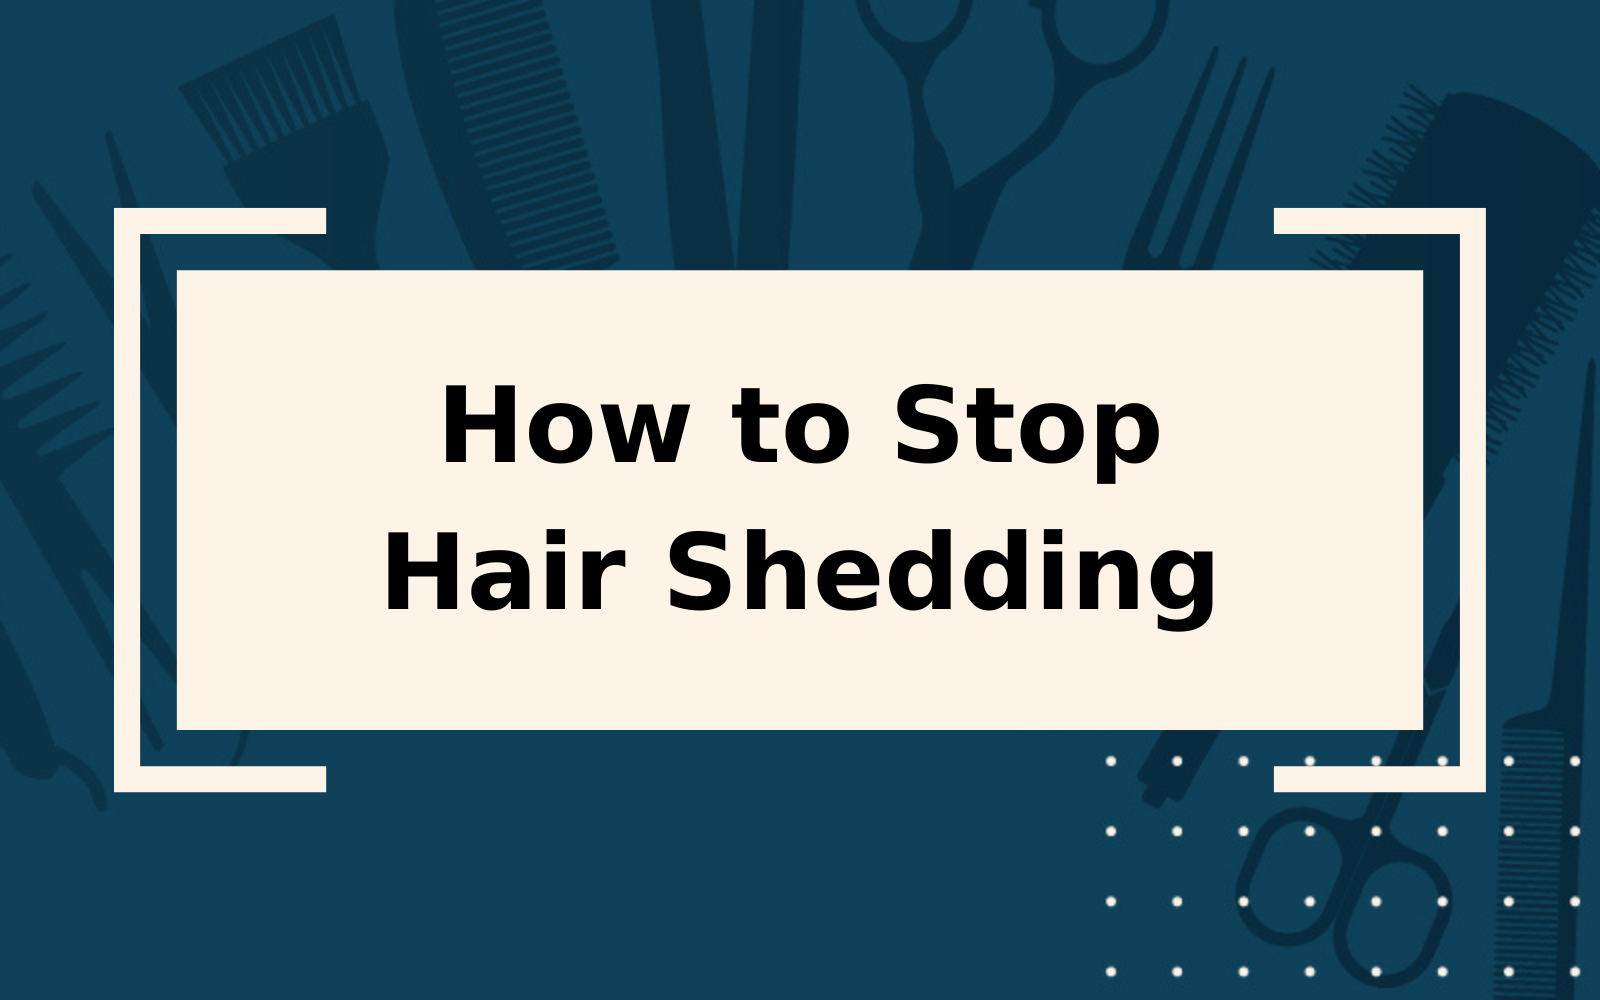 How to Stop Hair Shedding | Step-by-Step Guide